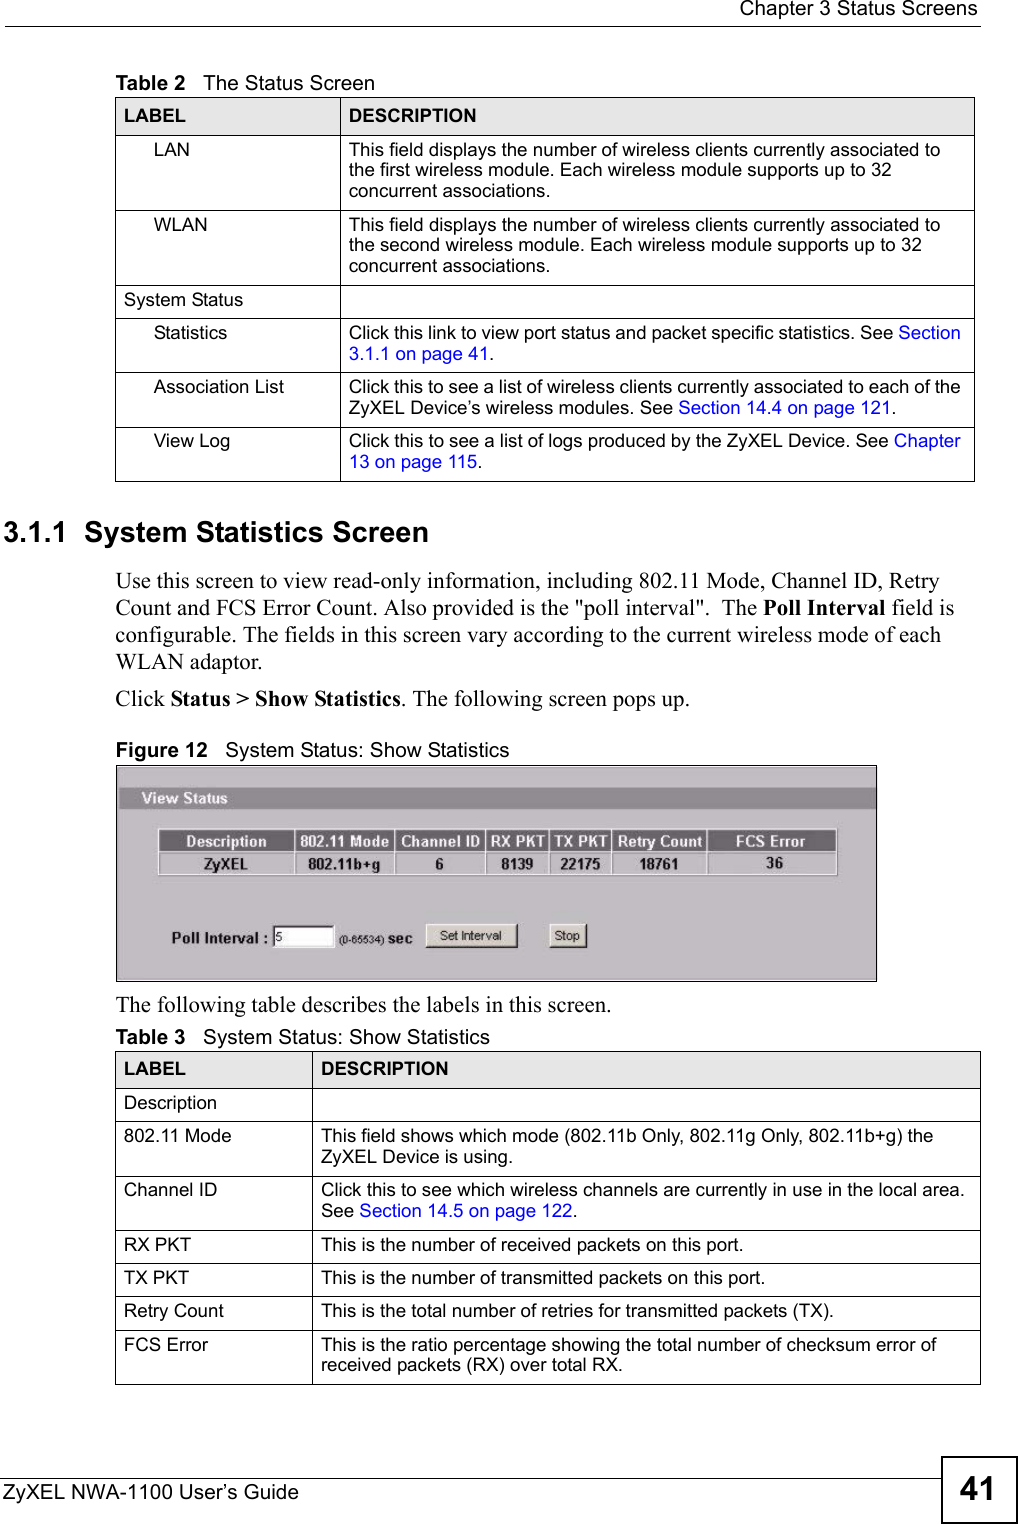  Chapter 3 Status ScreensZyXEL NWA-1100 User’s Guide 413.1.1  System Statistics ScreenUse this screen to view read-only information, including 802.11 Mode, Channel ID, Retry Count and FCS Error Count. Also provided is the &quot;poll interval&quot;.  The Poll Interval field is configurable. The fields in this screen vary according to the current wireless mode of each WLAN adaptor.Click Status &gt; Show Statistics. The following screen pops up.Figure 12   System Status: Show StatisticsThe following table describes the labels in this screen.LAN This field displays the number of wireless clients currently associated to the first wireless module. Each wireless module supports up to 32 concurrent associations. WLAN This field displays the number of wireless clients currently associated to the second wireless module. Each wireless module supports up to 32 concurrent associations.System StatusStatistics Click this link to view port status and packet specific statistics. See Section 3.1.1 on page 41.Association List Click this to see a list of wireless clients currently associated to each of the ZyXEL Device’s wireless modules. See Section 14.4 on page 121.View Log Click this to see a list of logs produced by the ZyXEL Device. See Chapter 13 on page 115.Table 2   The Status ScreenLABEL DESCRIPTIONTable 3   System Status: Show StatisticsLABEL DESCRIPTIONDescription802.11 Mode This field shows which mode (802.11b Only, 802.11g Only, 802.11b+g) the ZyXEL Device is using.Channel ID Click this to see which wireless channels are currently in use in the local area. See Section 14.5 on page 122.RX PKT This is the number of received packets on this port.TX PKT This is the number of transmitted packets on this port.Retry Count This is the total number of retries for transmitted packets (TX).FCS Error This is the ratio percentage showing the total number of checksum error of received packets (RX) over total RX.